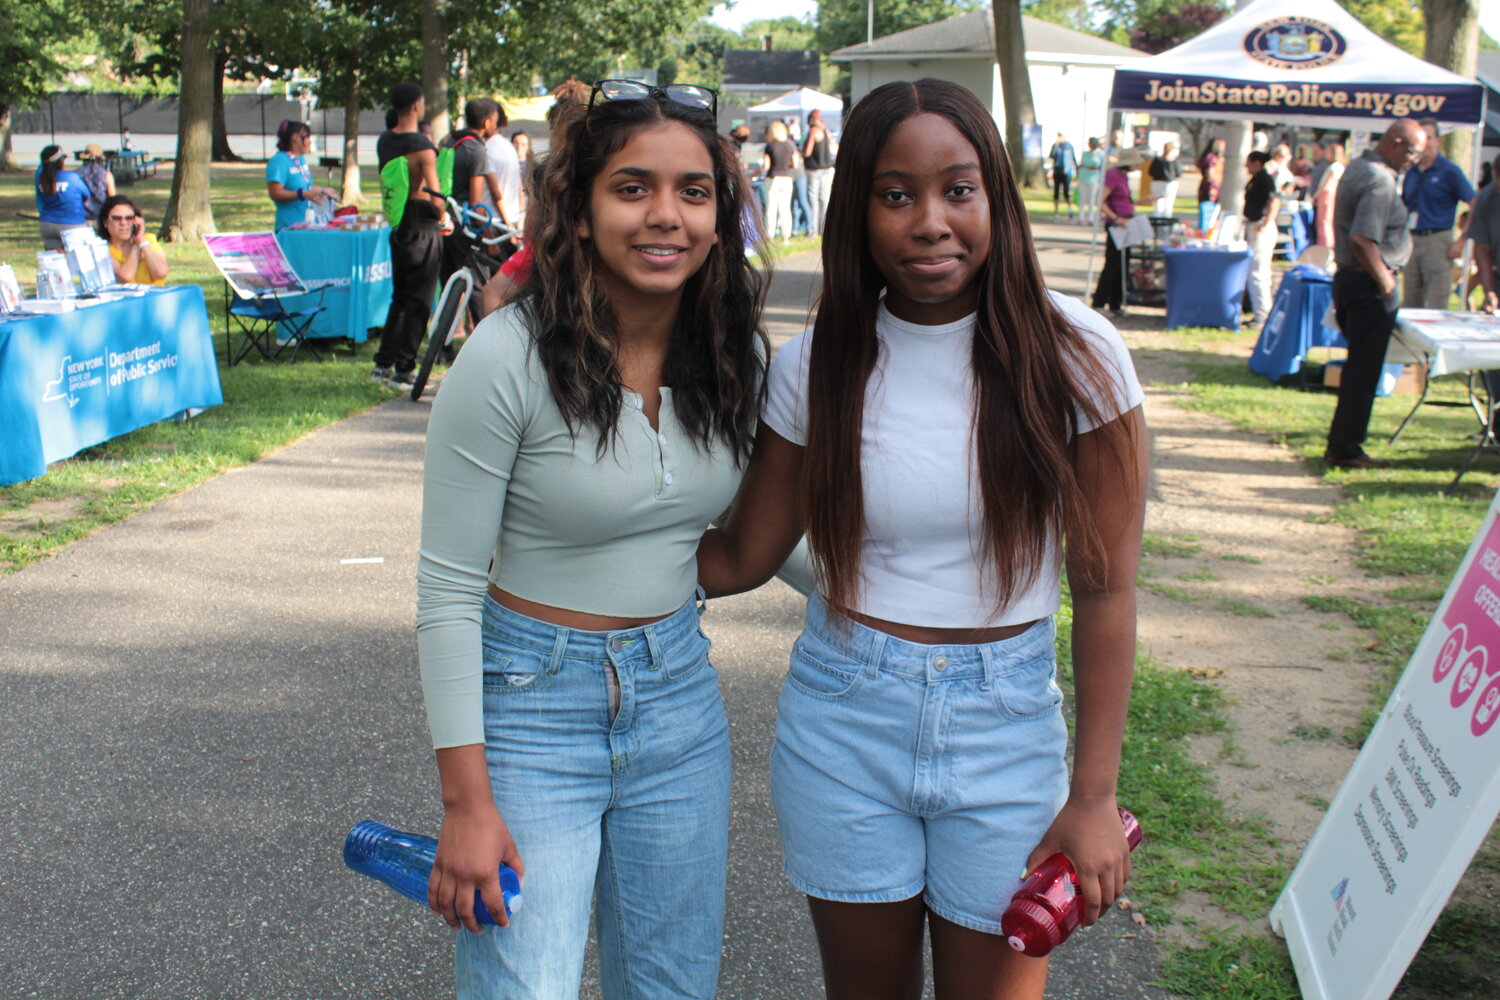 Baldwin Highschoolers Maekyla Massey and Sienna Hardy stroll through the park learning from booths and collecting goods.